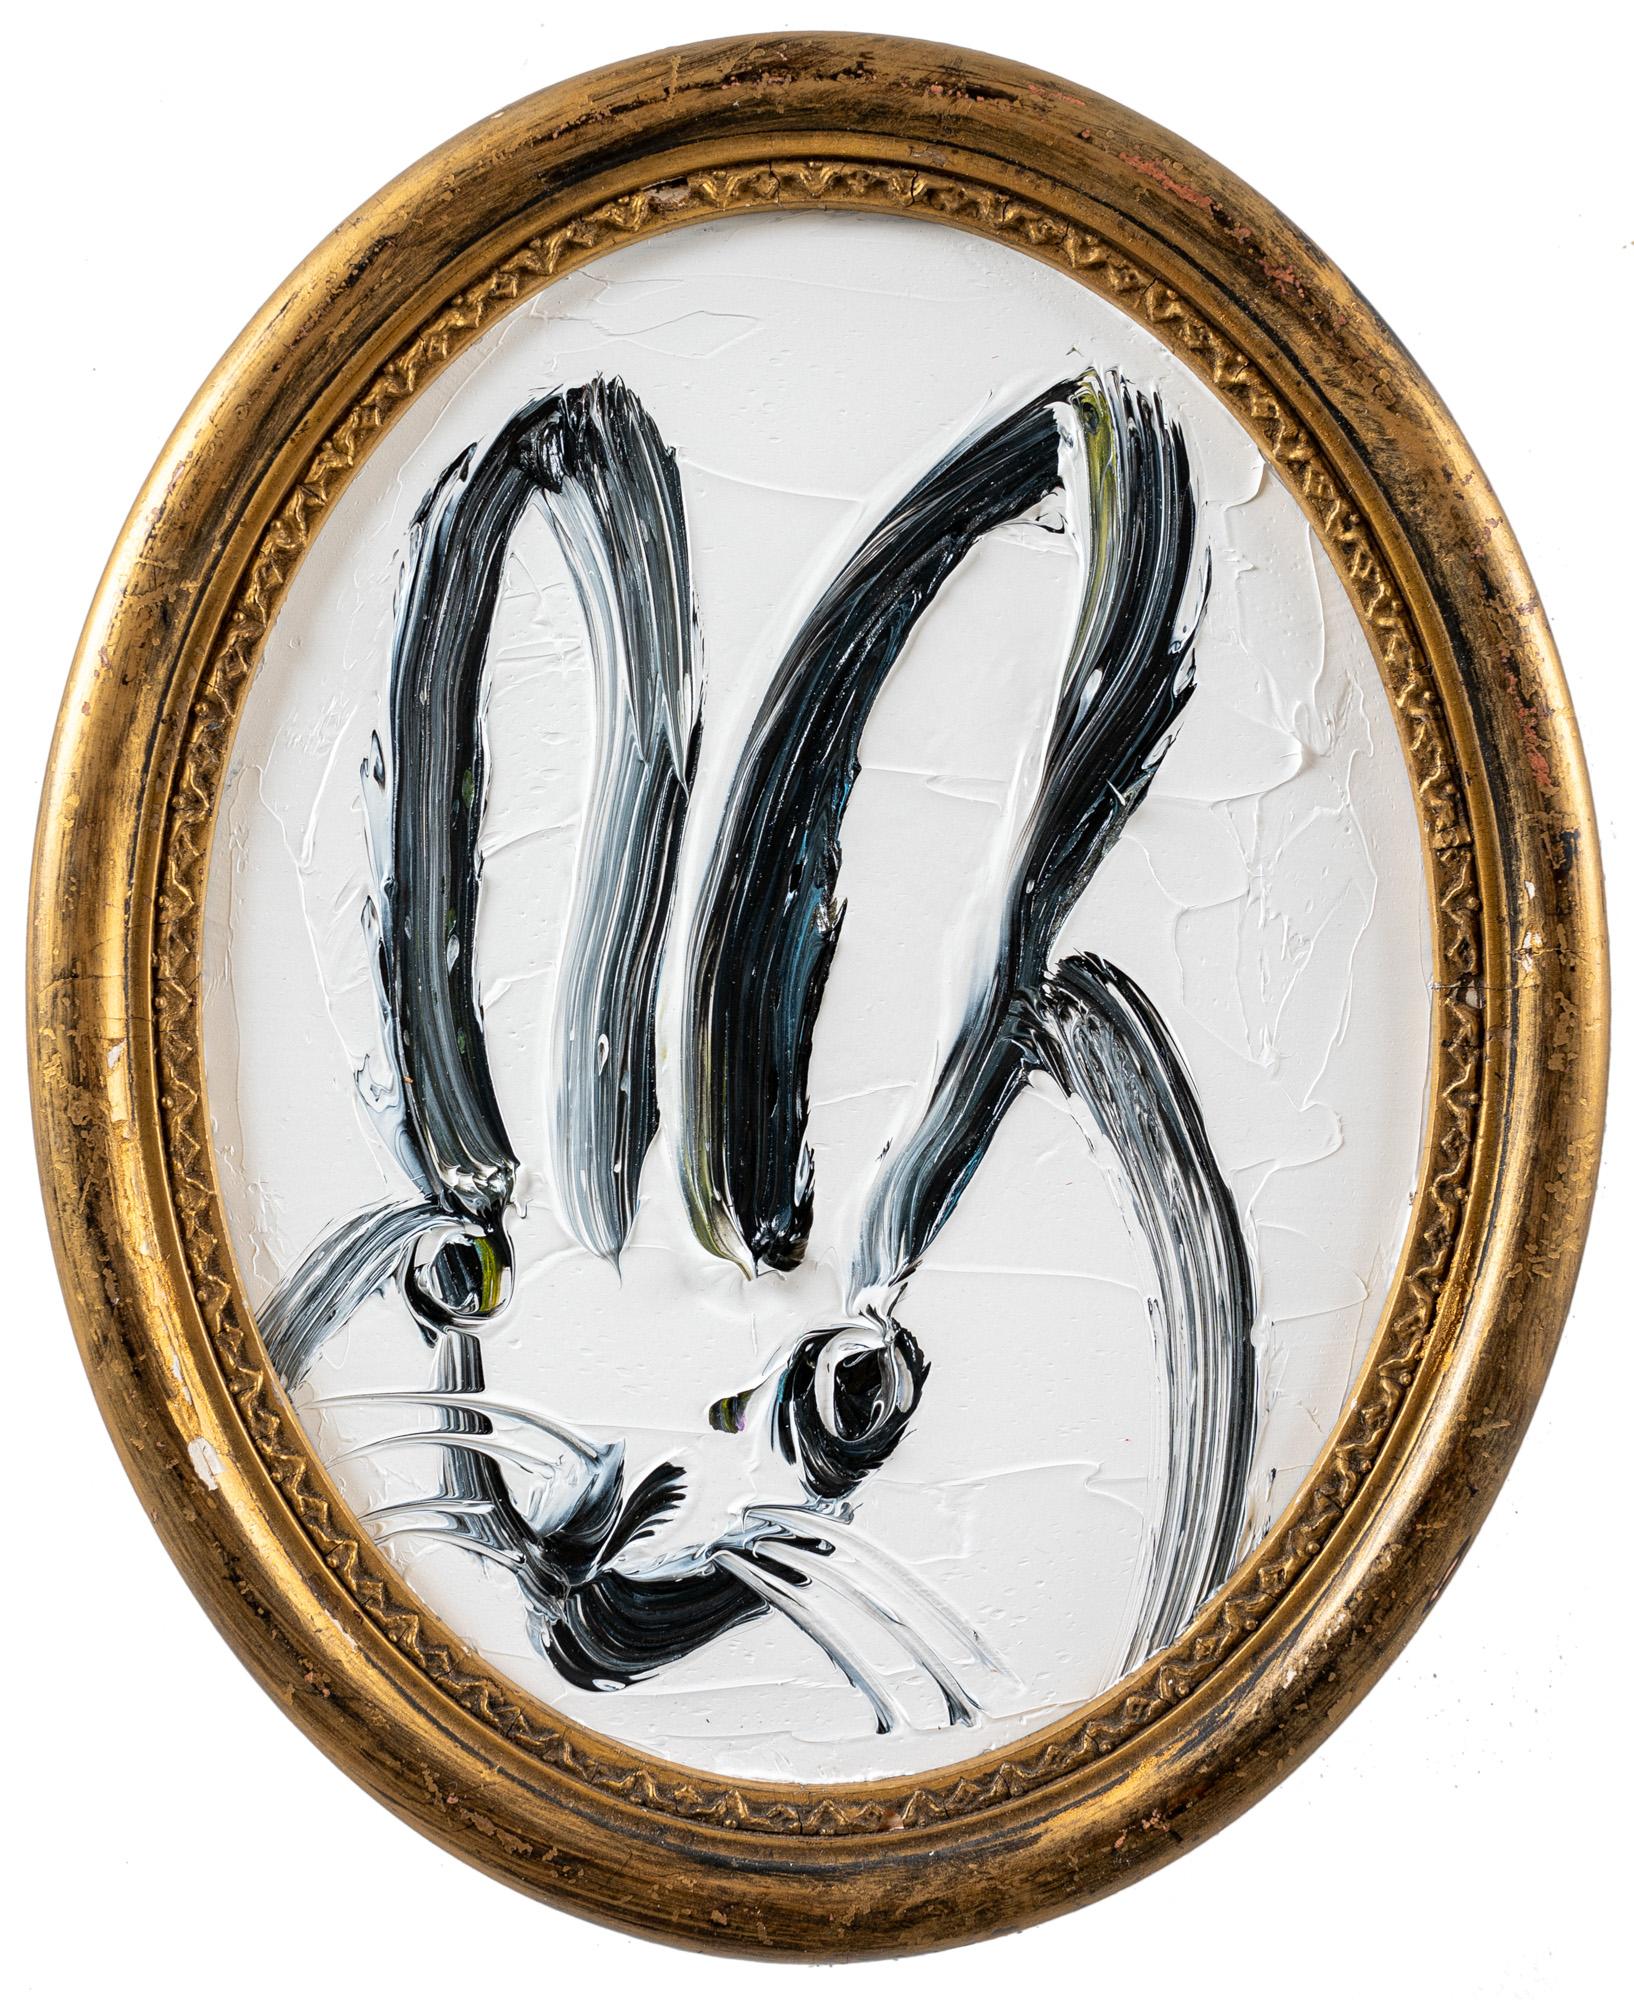 Hunt Slonem "Max" Neo-Expressionist Oval Bunny Framed Oil on Wood Painting